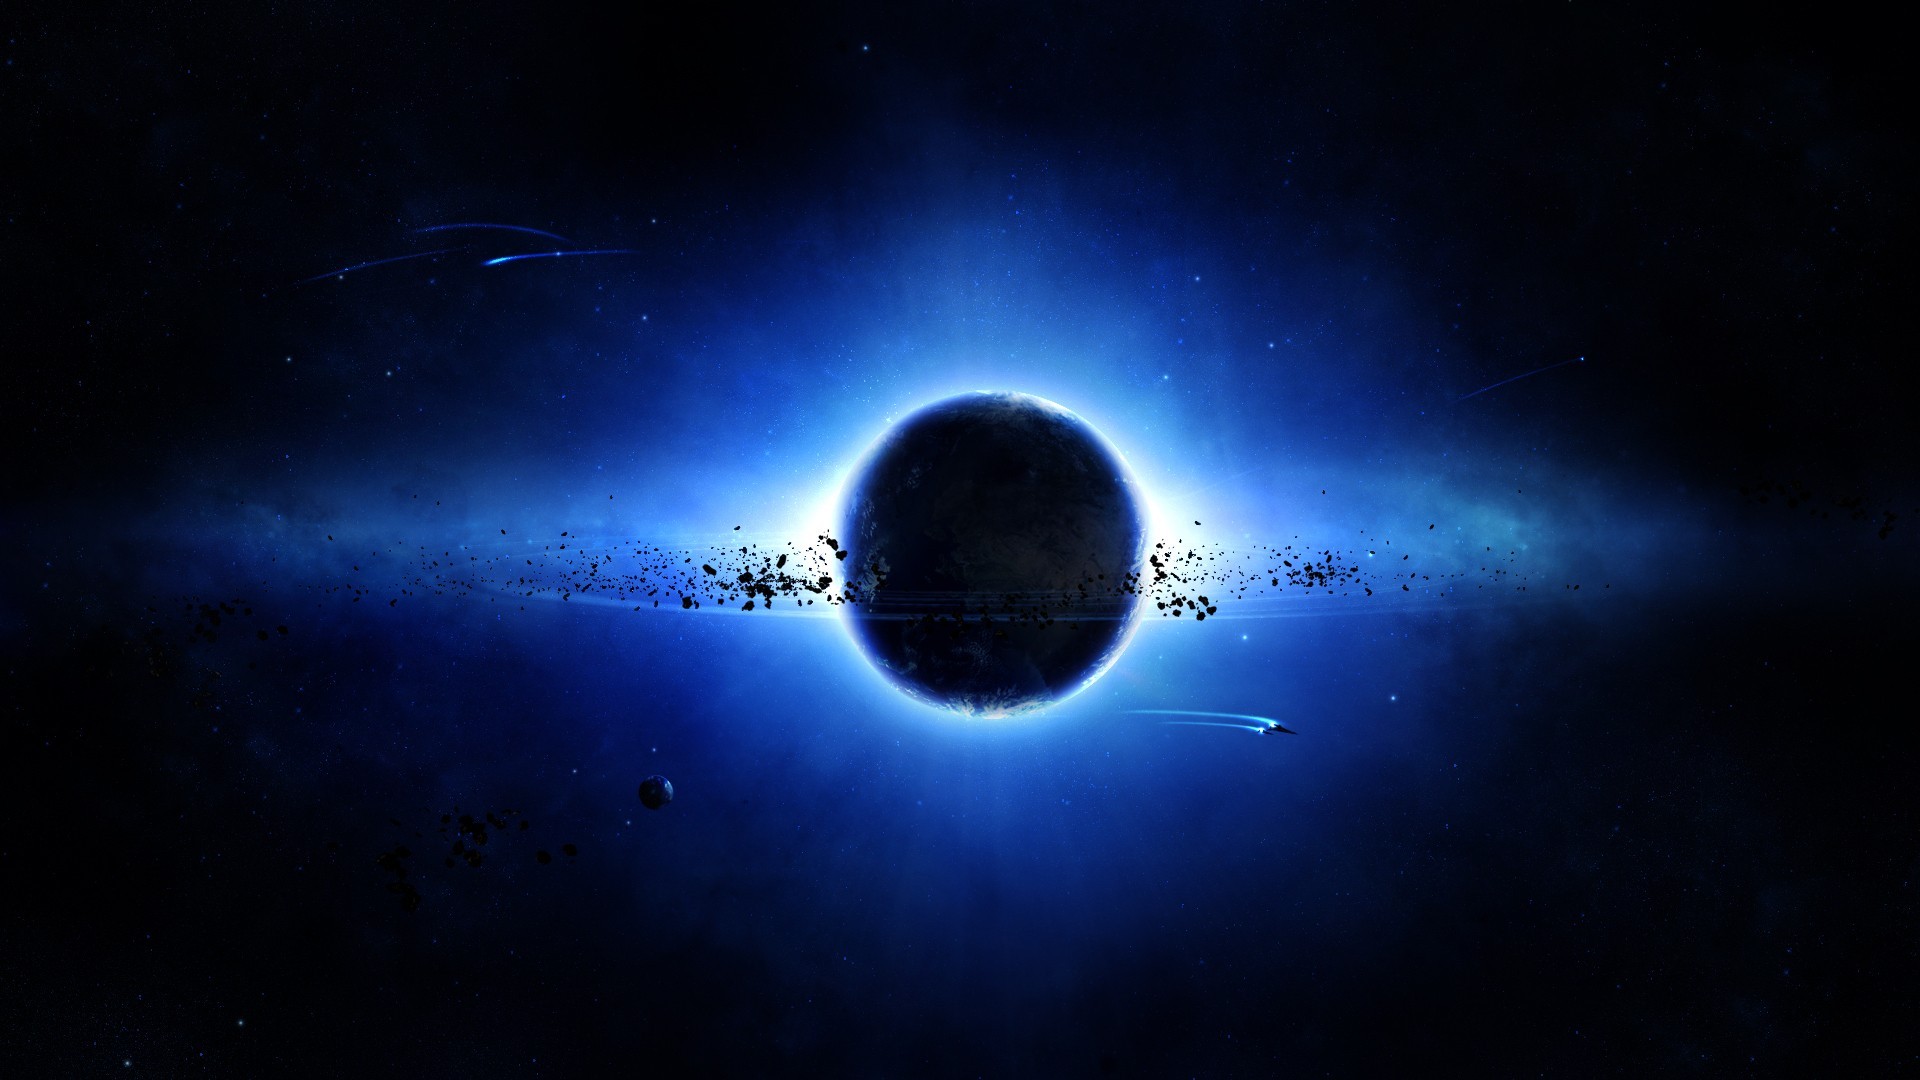 Blue Space wallpaper ·① Download free amazing wallpapers for desktop